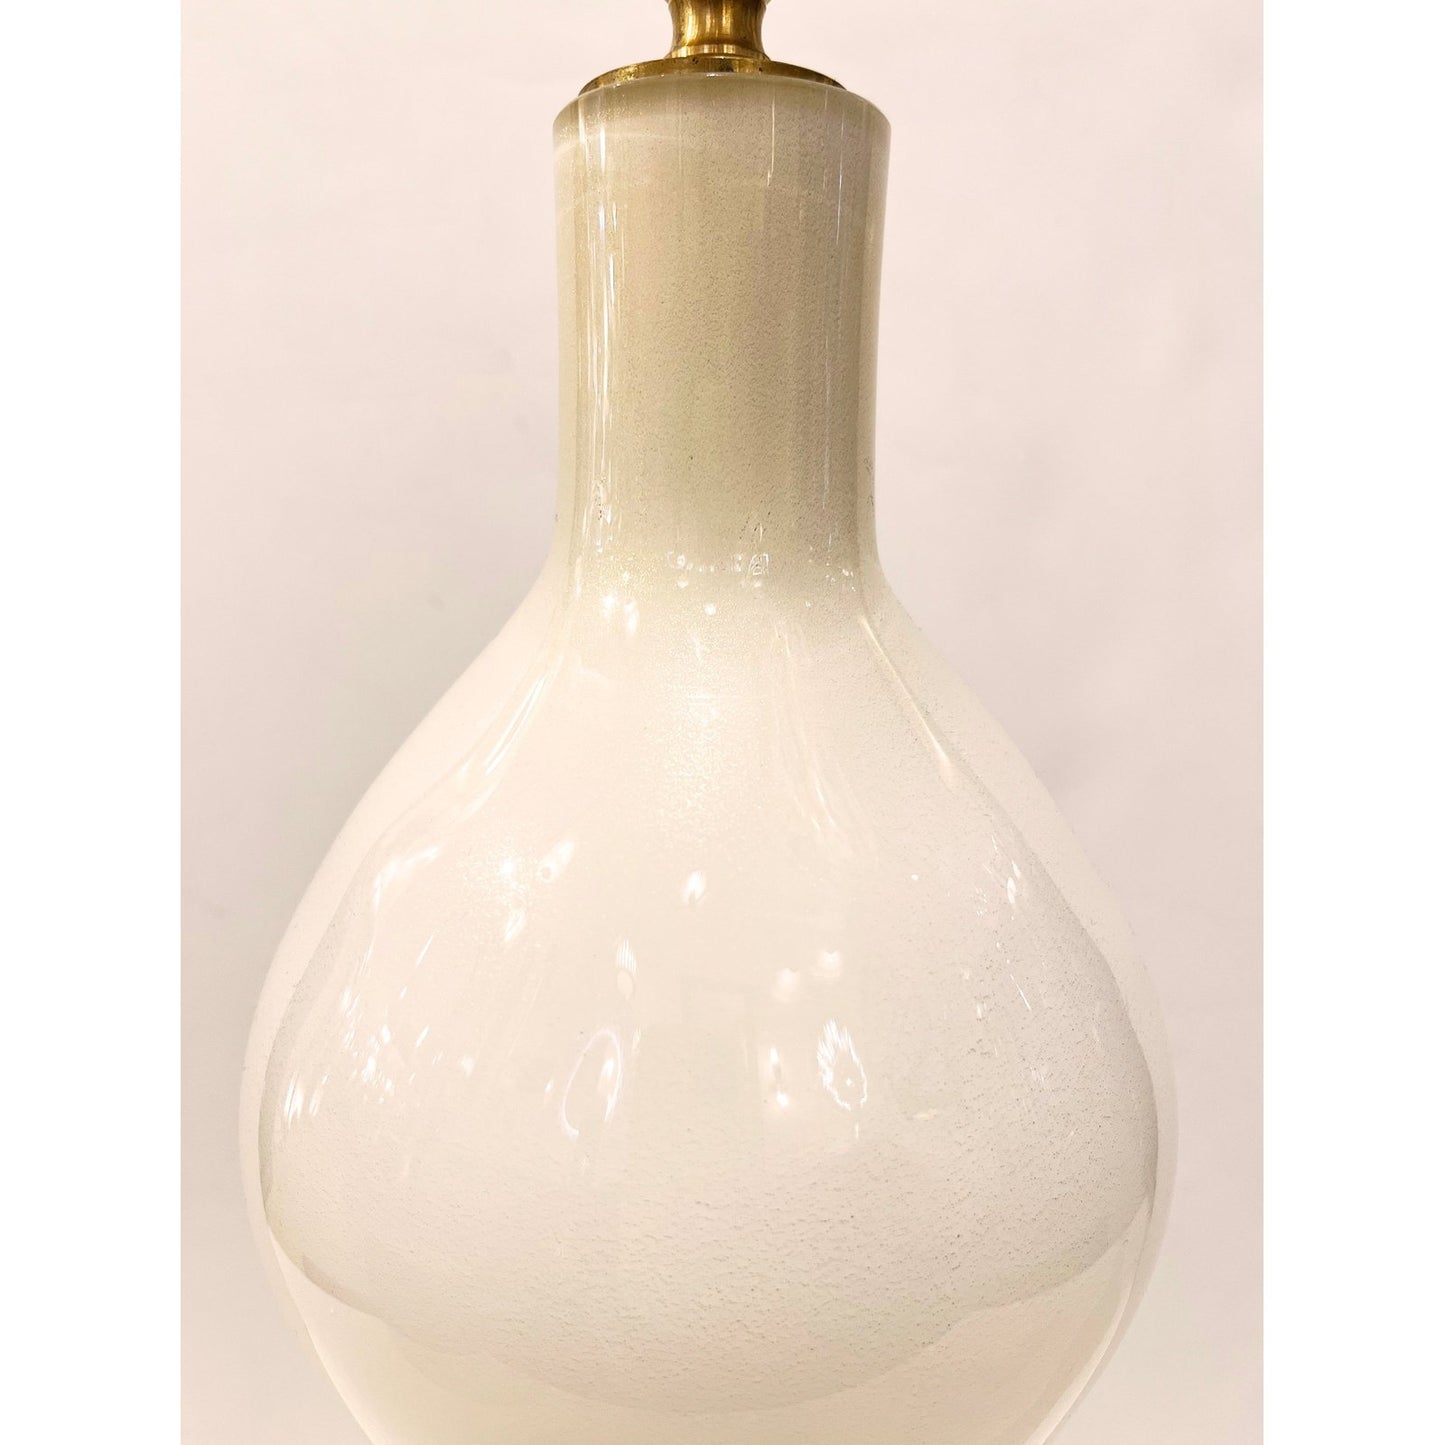 Italian Modern Pair of Cream Ivory Gold Silhouette Lamps with Terracotta shades